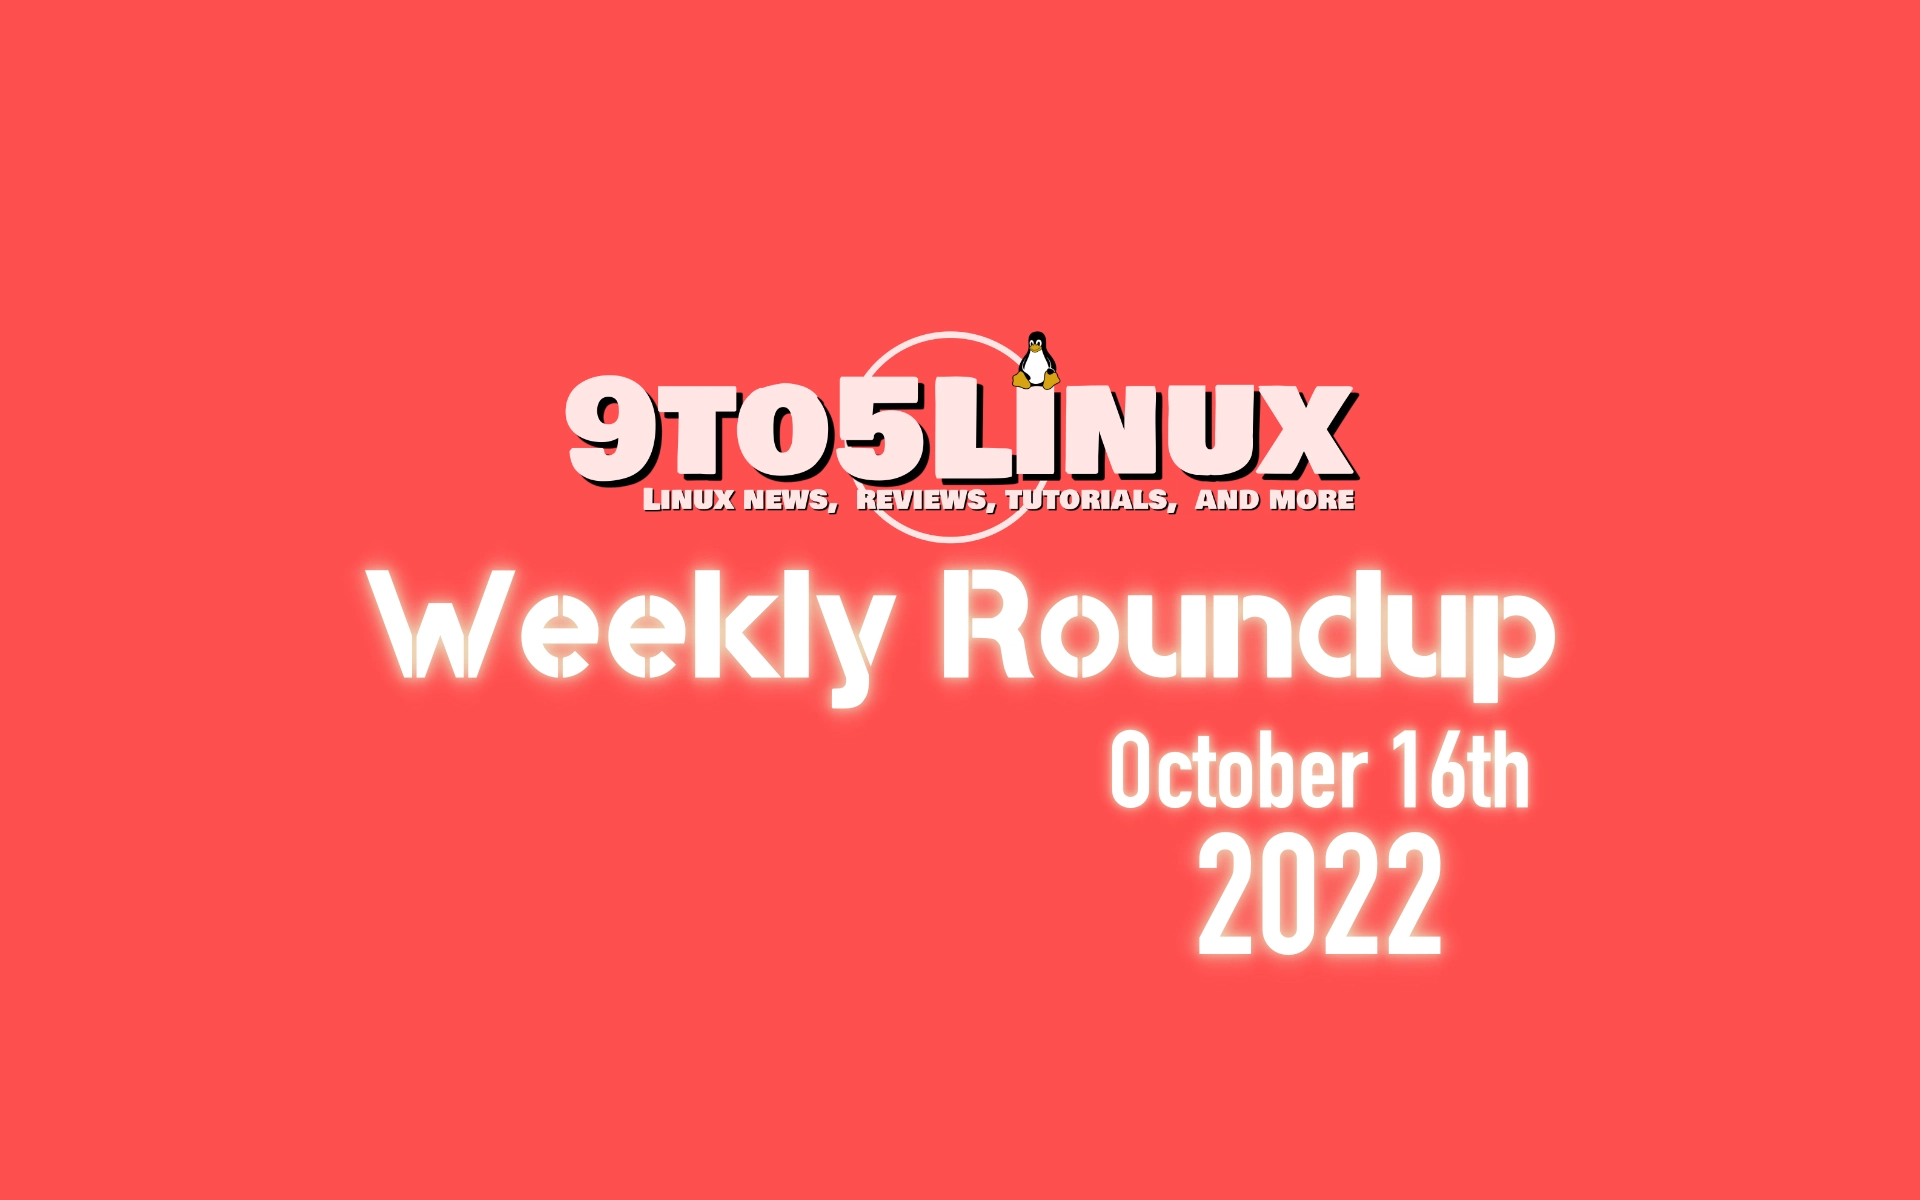 9to5Linux Weekly Roundup: October 16th, 2022